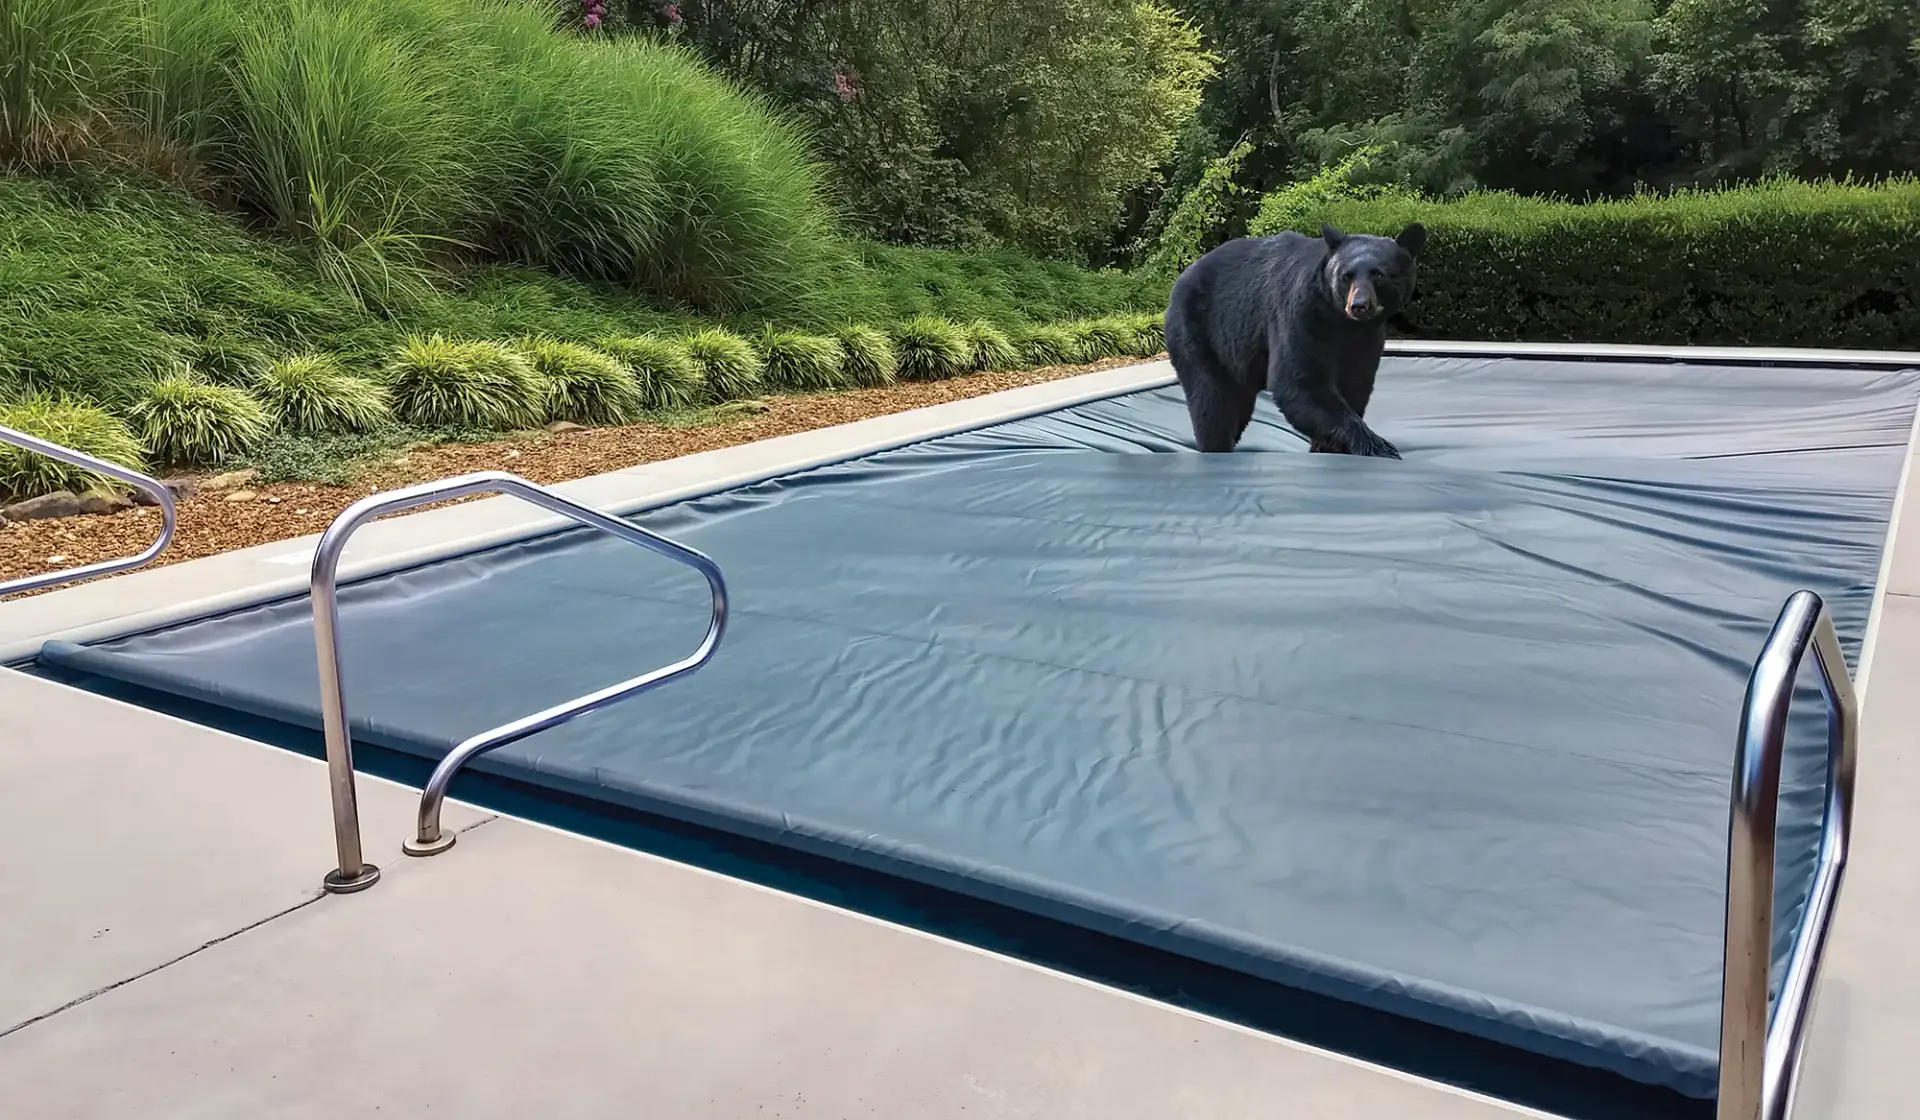 automatic pool cover with a bear standing on top to show how much weight it can hold